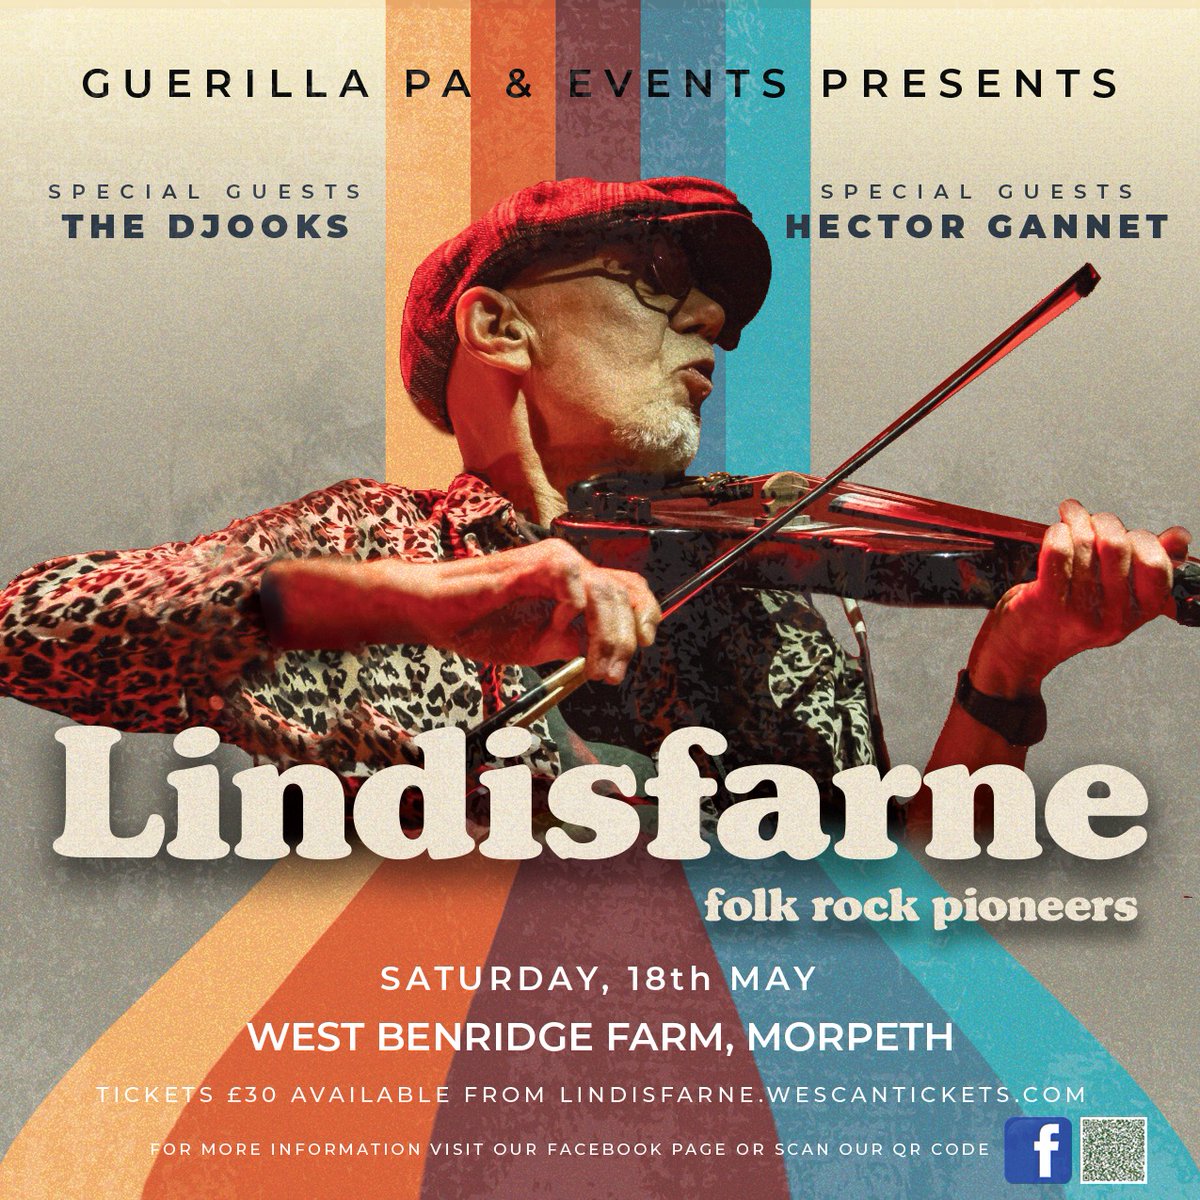 Catch us this Saturday 18 May at West Benridge Farm, one of Northumberland's hidden gems. With support from the reliably brilliant @HectorGannet and The Djooks. Camping available, plus refreshments from VDubShack and Dou_h & Co. Final tickets on sale now: lindisfarne.wescantickets.com